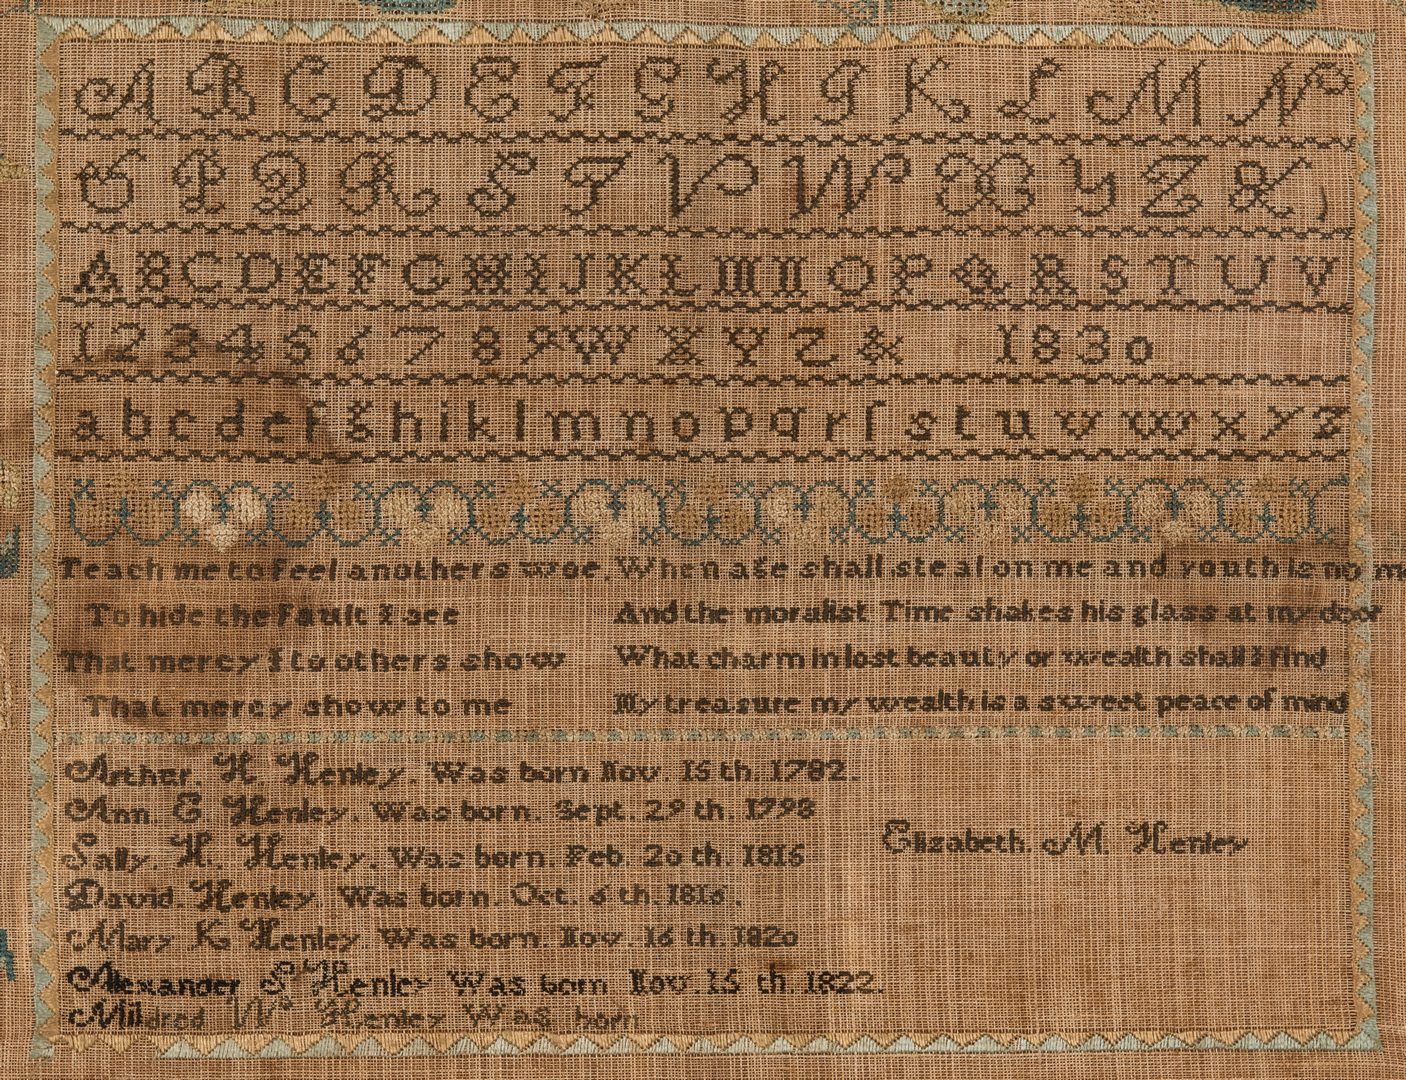 Lot 591: Tennessee Sampler, Henley Family, Knox County